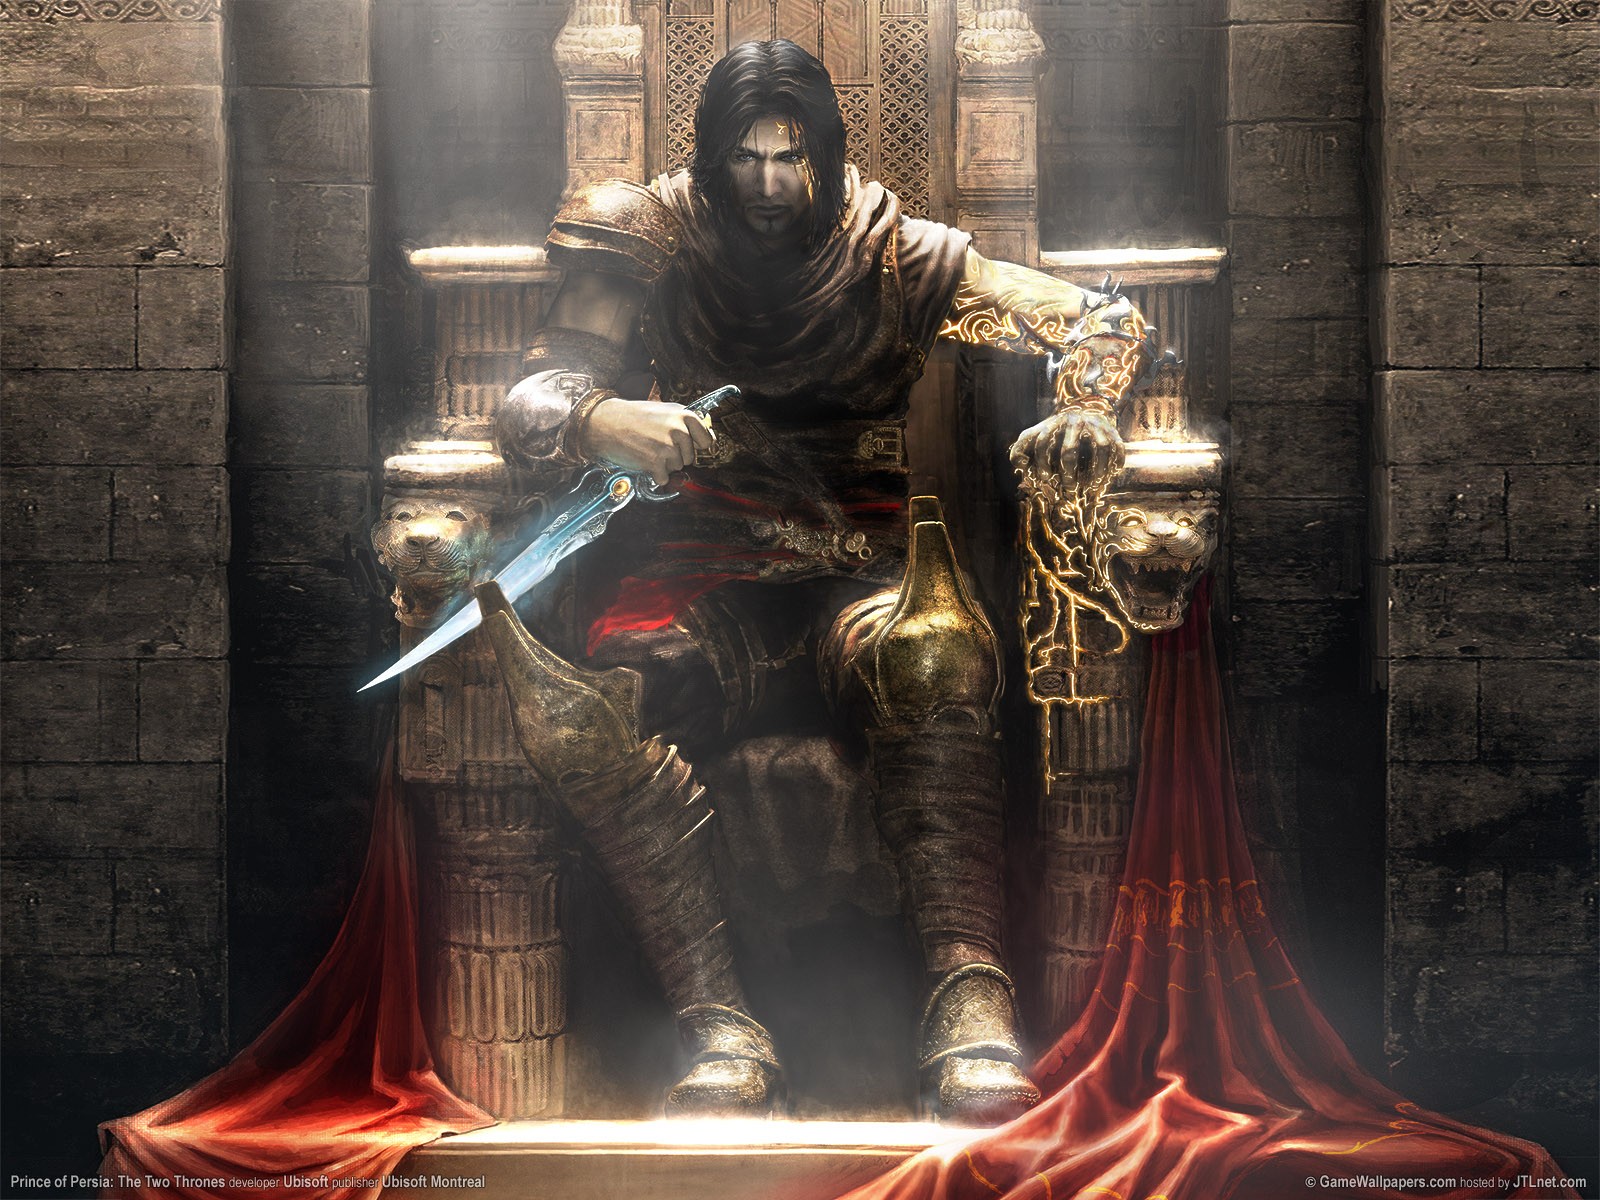 Prince Of Persia, Warrior Within Wallpaper